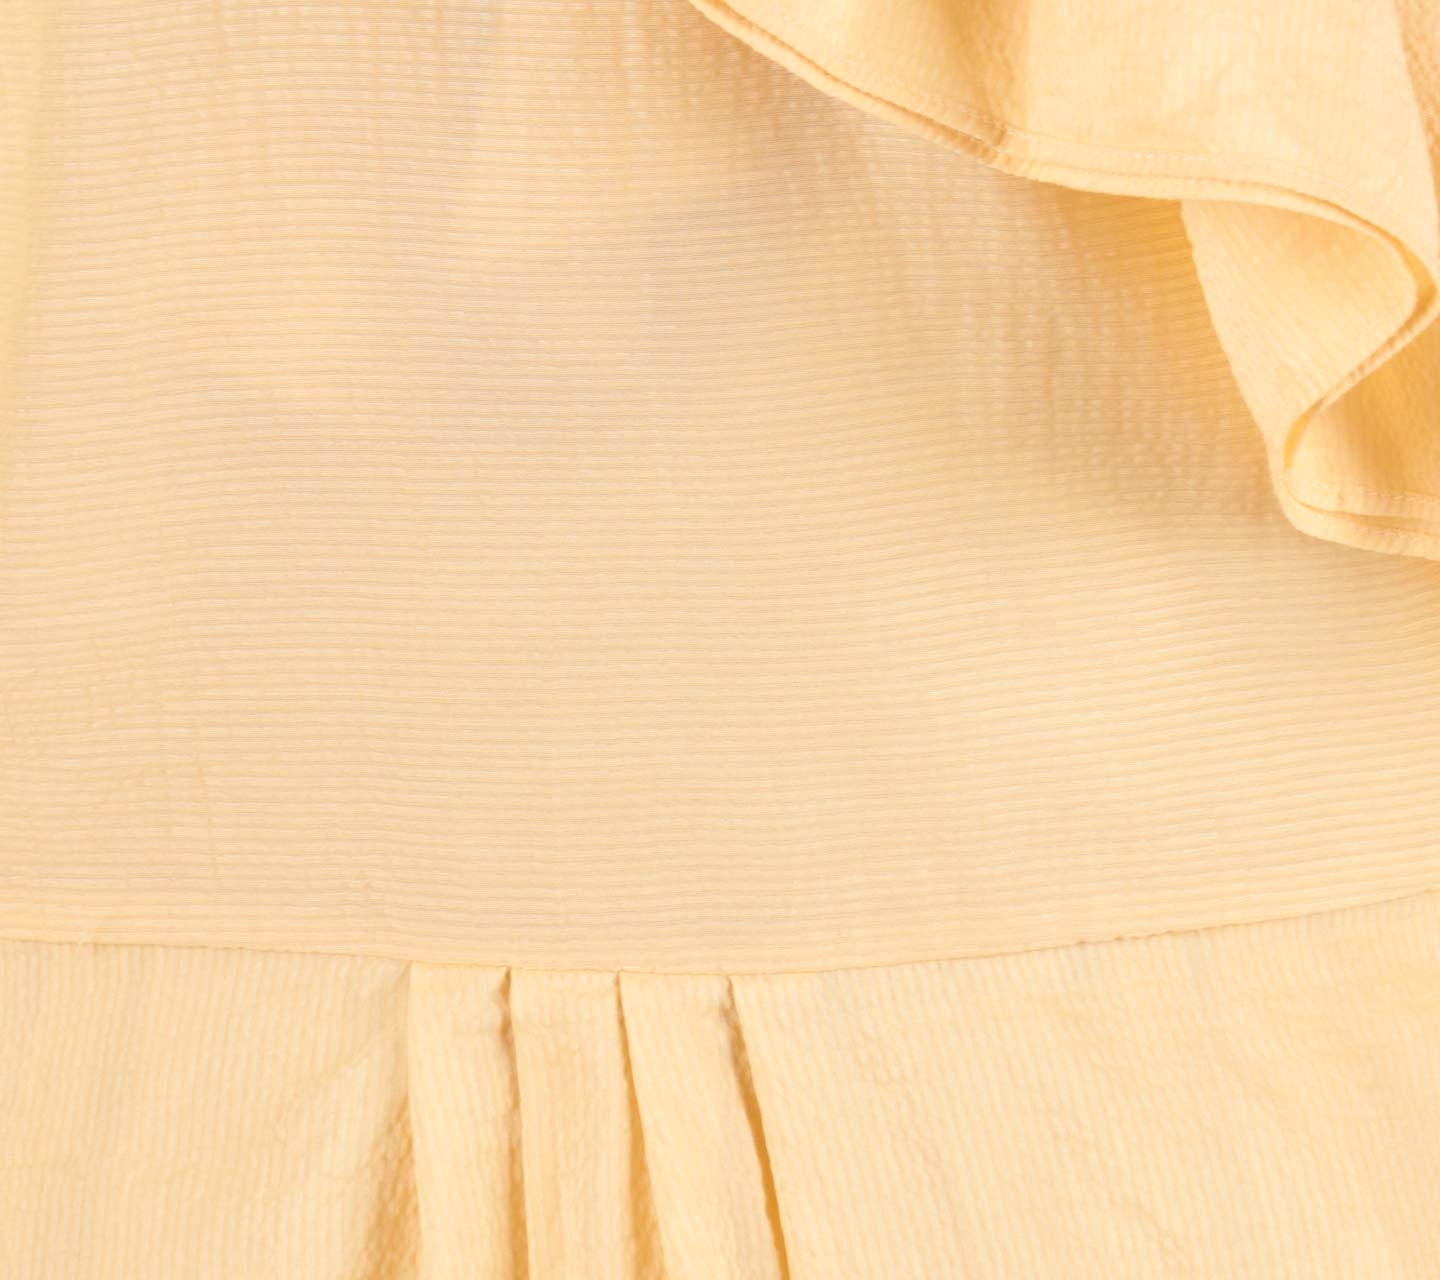 Kenneth Cole Yellow Wrap Ruffles Blouse